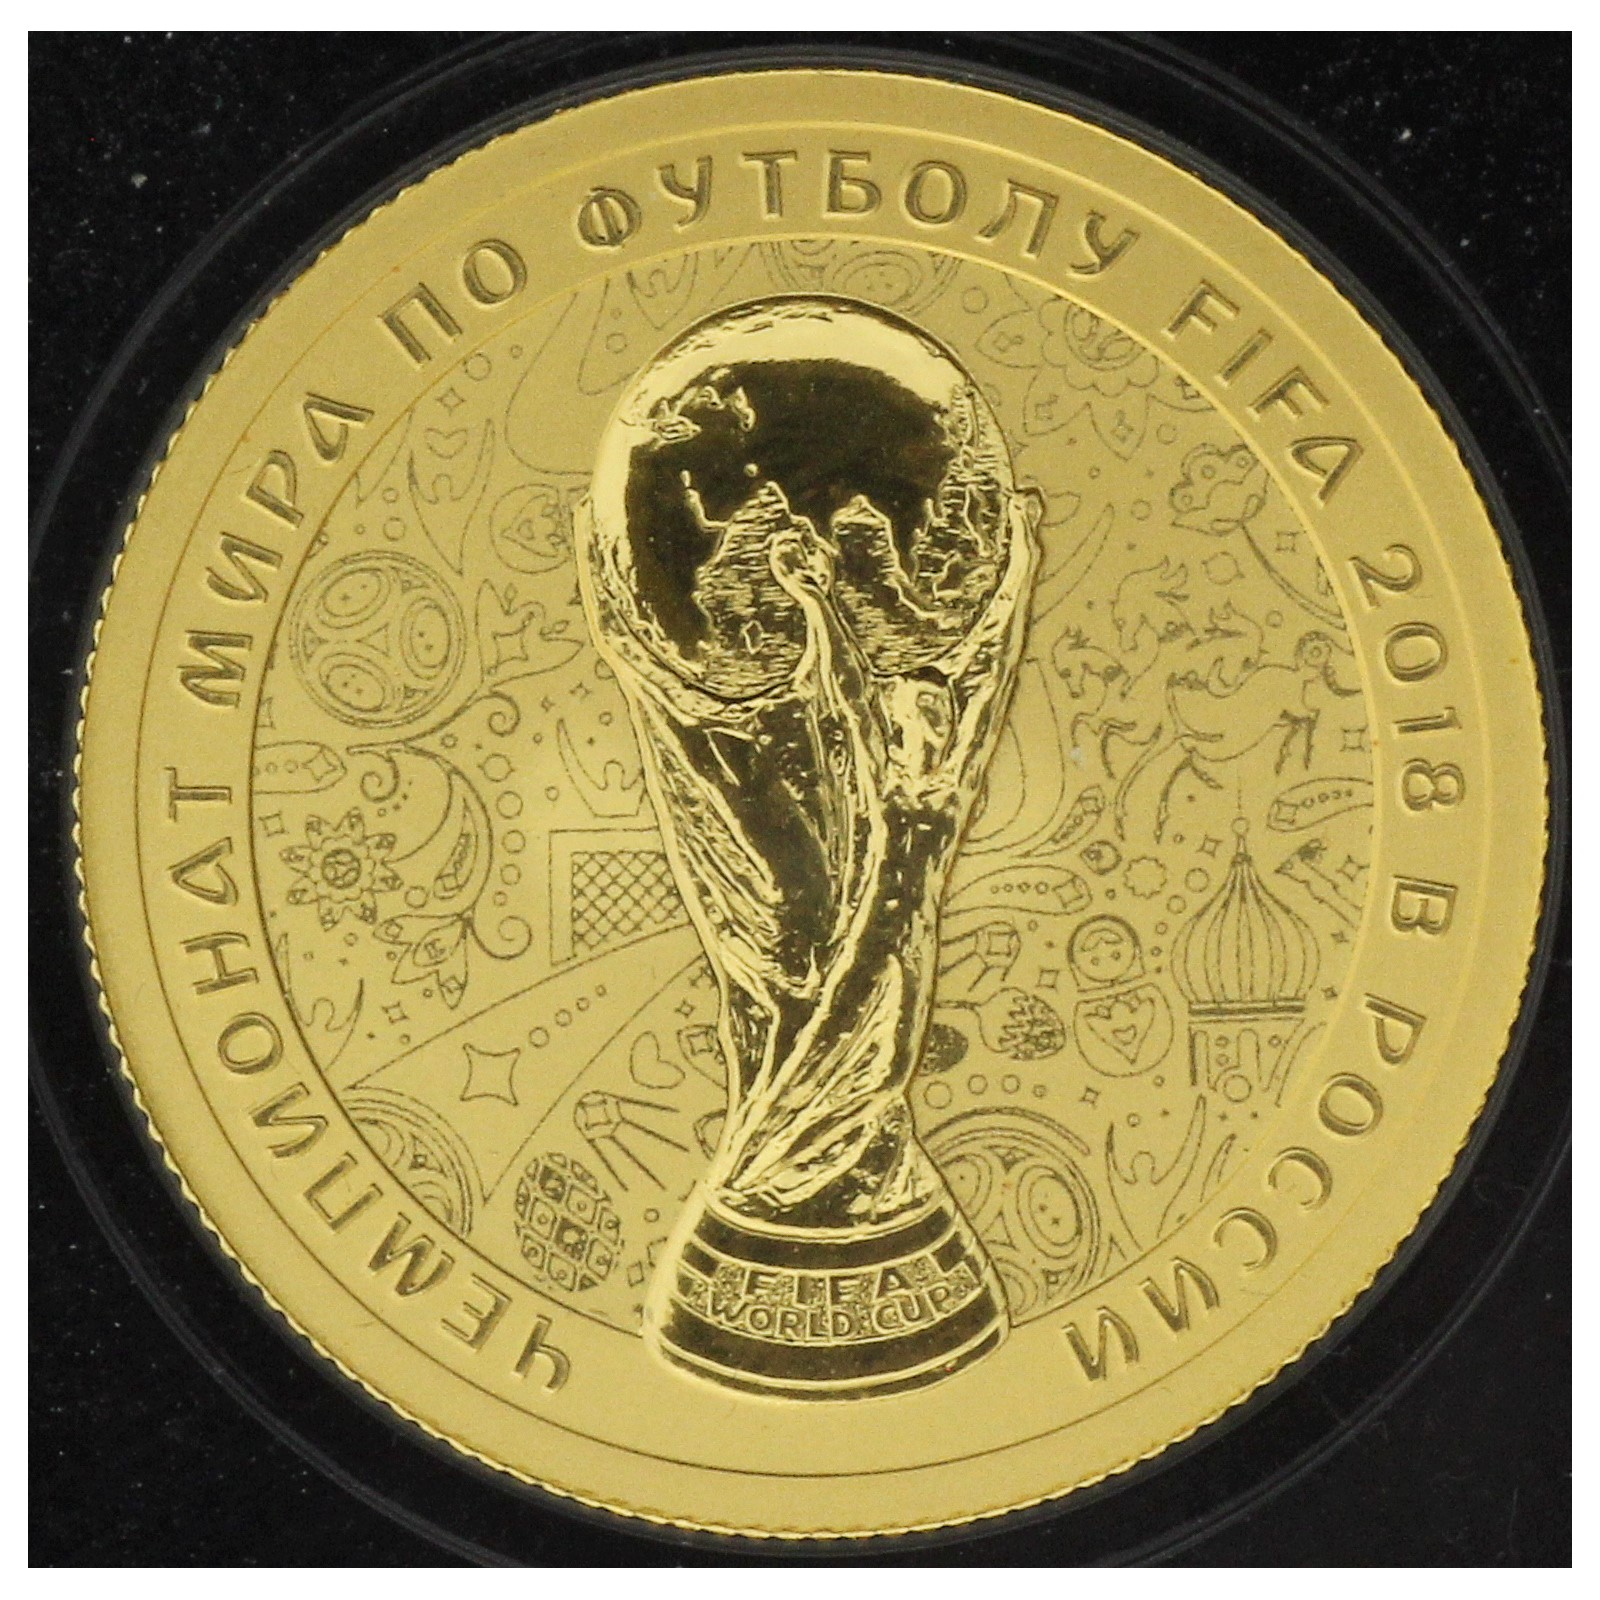 Russia - 50 rubles - 2018 - 2018 FIFA World Cup Russia - Trophy - 1/4oz